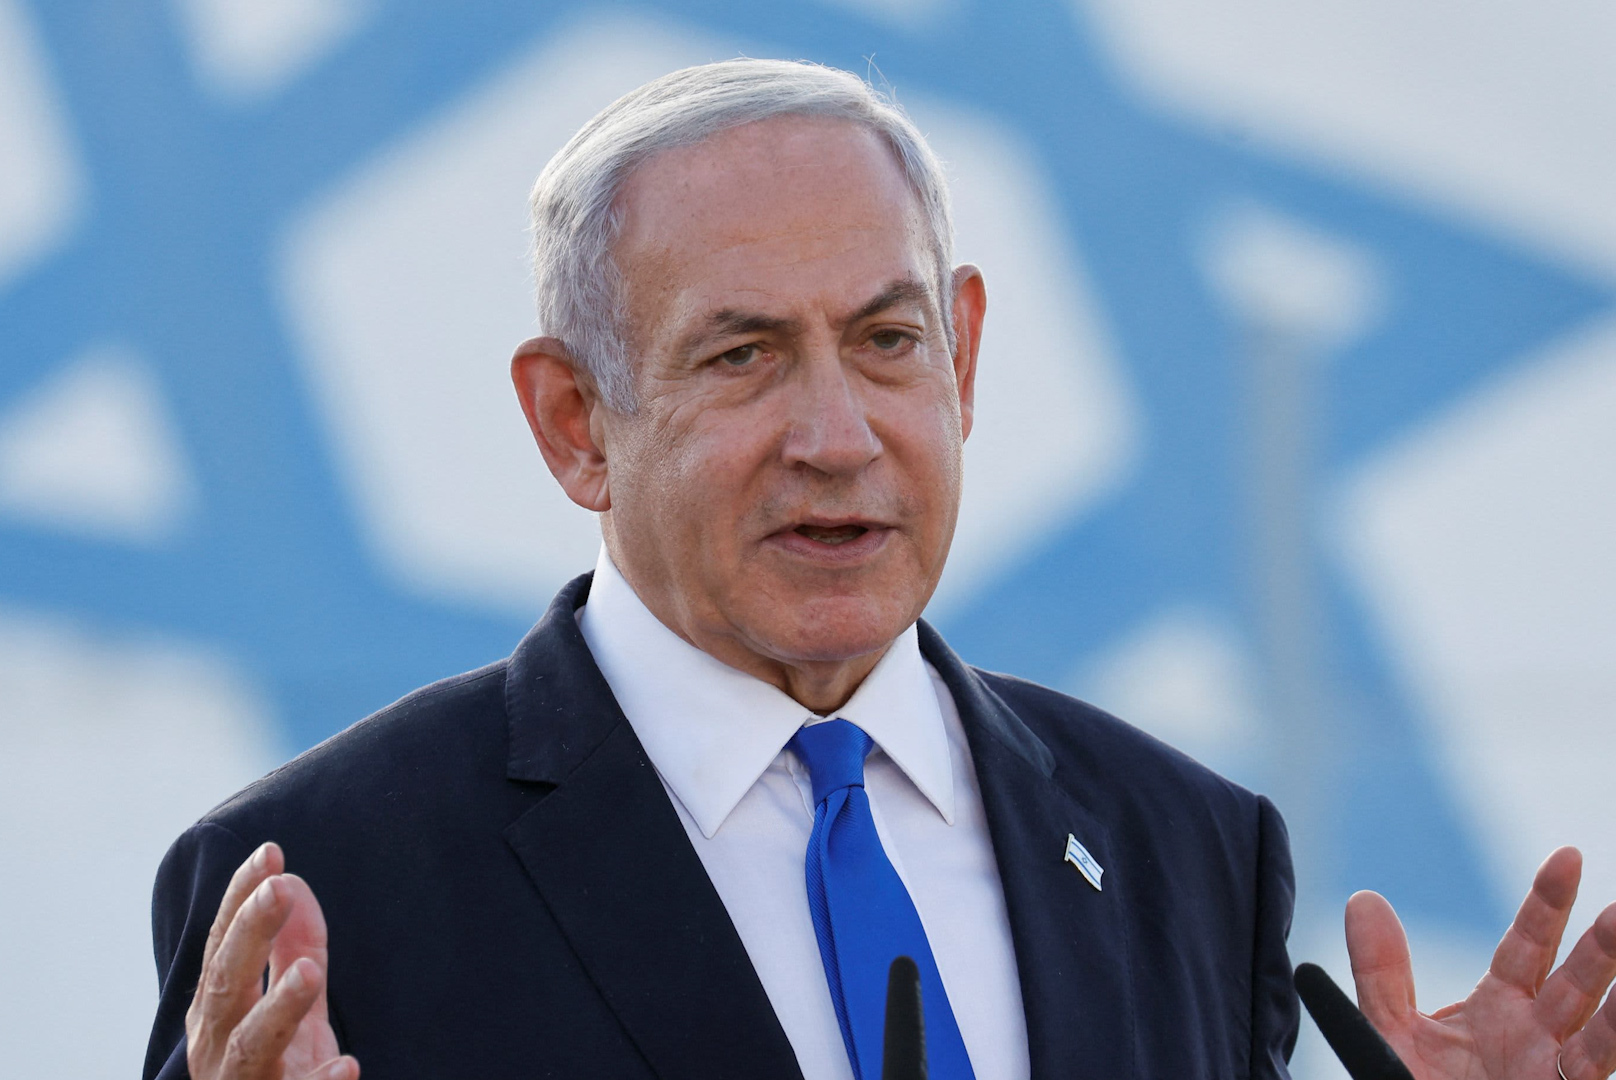 Netanyahu said cancelling US delegation to Washington after UNSC ceasefire vote was ‘message to Hamas’